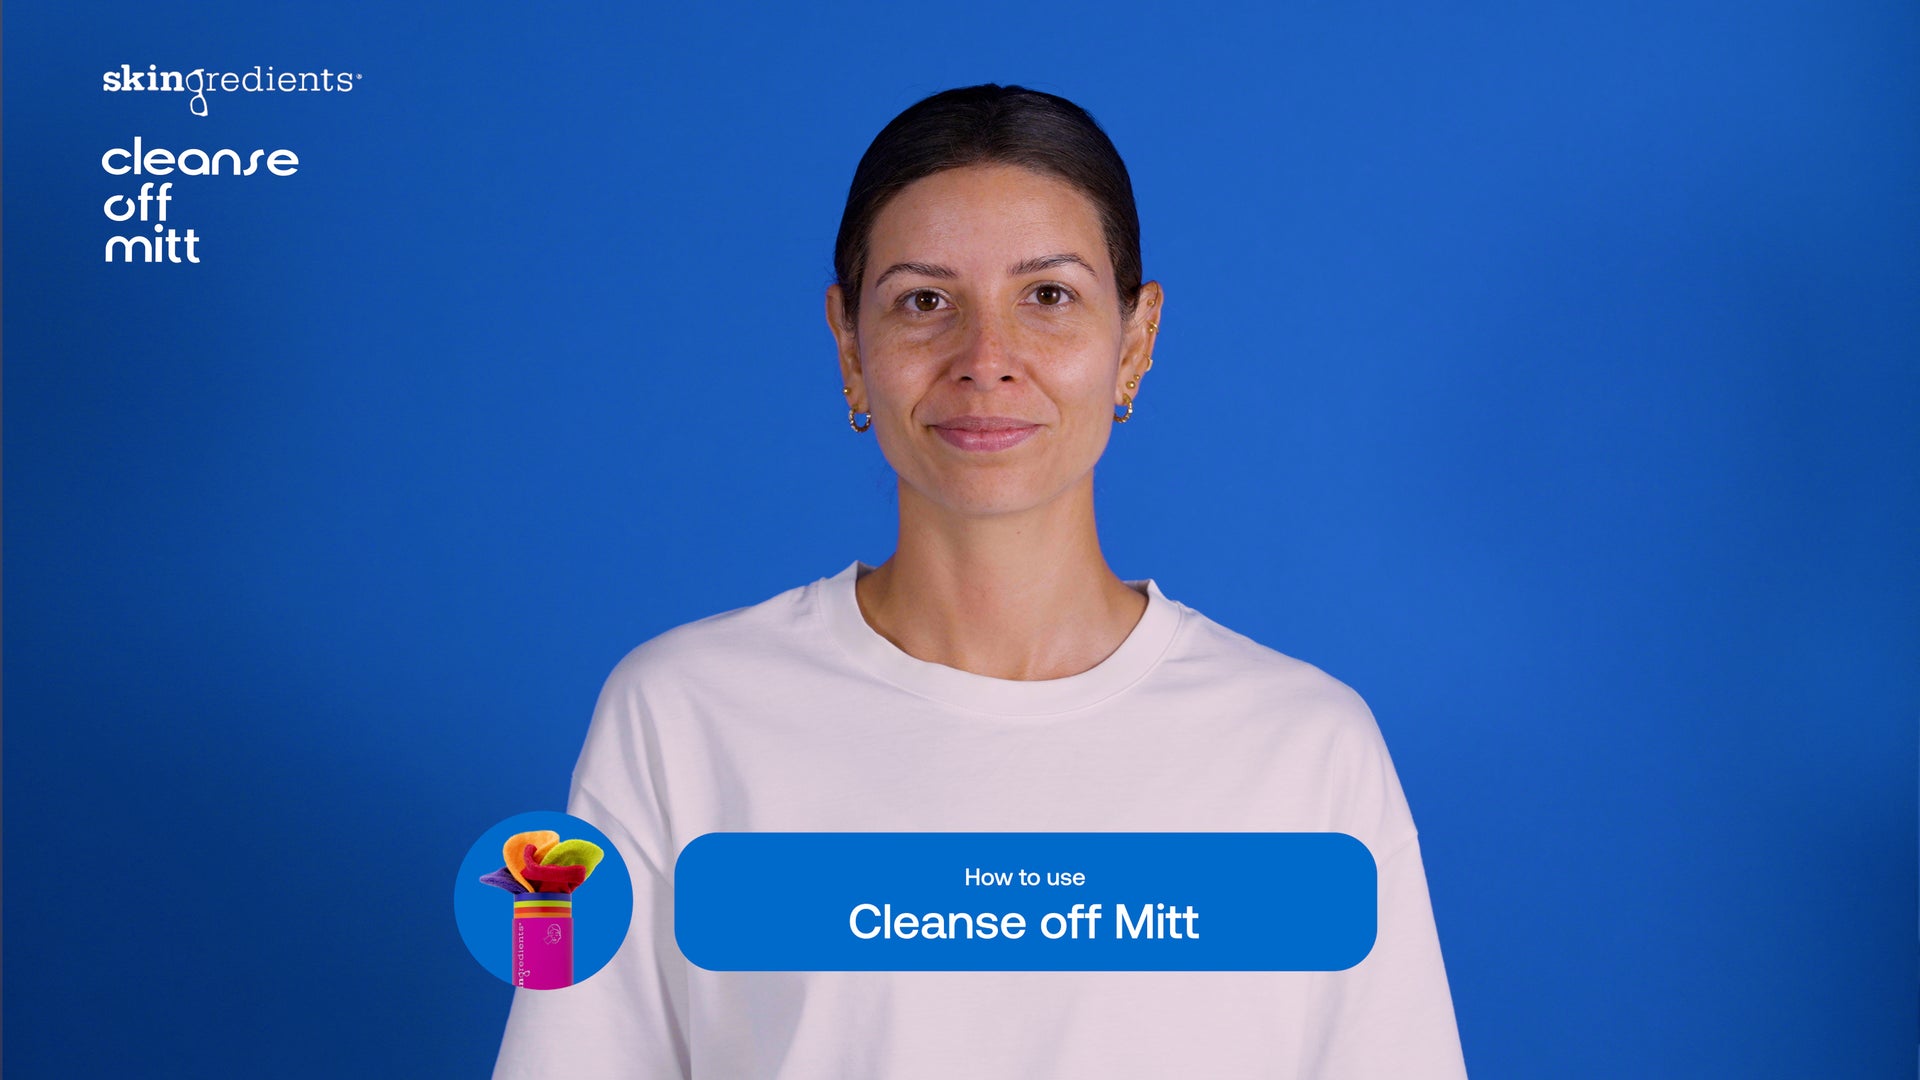 Load video: &lt;meta charset=&quot;utf-8&quot;&gt;&lt;meta charset=&quot;utf-8&quot;&gt;
&lt;div&gt;
&lt;meta charset=&quot;utf-8&quot;&gt;
&lt;p data-mce-fragment=&quot;1&quot;&gt;The Cleanse Off Mitt quickly removes all makeup naturally – including mascara. Just add water, gently swipe the mitt across your face and watch as all traces of makeup disappear.&lt;br&gt;&lt;/p&gt;
&lt;/div&gt;
&lt;p&gt;It is ideal as your pre-cleanse option before your active cleanser (as part of a double cleanse).&lt;/p&gt;
&lt;p&gt;Place your hand into the Mitt, just add warm water and remove all makeup/pollution etc from the face. Follow with your active cleanser.&lt;/p&gt;
&lt;p&gt;&lt;strong&gt;Features: &lt;/strong&gt;&lt;/p&gt;
&lt;ul&gt;
&lt;li&gt;Reusable &lt;/li&gt;
&lt;li&gt;Suitable for all skin types (even very sensitive skin)&lt;/li&gt;
&lt;li&gt;Perfect for all ages and genders &lt;/li&gt;
&lt;li&gt;Ideal for travel, festivals &amp; gym-goers &lt;/li&gt;
&lt;/ul&gt;
&lt;p&gt;Cleanse Off Mitt is Irish and created by The Skin Nerd - wehoo! &lt;/p&gt;
&lt;p&gt;Remember it is advisable to change your Cleanse Off Mitt every three months and to hand-wash directly after every use using bacterial soap. We recommend that you pop it into the washing machine, inside out, once a week at 60˚ celsius.&lt;/p&gt;
&lt;p&gt;You can follow Cleanse Off Mitt on&lt;span&gt; &lt;/span&gt;&lt;a href=&quot;https://www.facebook.com/thecleanseoffmitt/&quot; title=&quot;cleanse off mitt facebook&quot; target=&quot;_blank&quot;&gt;Facebook&lt;/a&gt;,&lt;span&gt; &lt;/span&gt;&lt;a href=&quot;https://www.instagram.com/cleanseoffmitt/&quot; title=&quot;cleanse off mitt instagram&quot; target=&quot;_blank&quot;&gt;Instagram&lt;/a&gt; and&lt;span&gt; &lt;/span&gt;&lt;a href=&quot;https://twitter.com/cleanseoffmitt&quot; title=&quot;cleanse off mitt twitter&quot; target=&quot;_blank&quot;&gt;Twitter&lt;/a&gt;&lt;span&gt; &lt;/span&gt;for more COM-related advice - feel free to use the hashtag&lt;span&gt; &lt;/span&gt;&lt;strong&gt;#COMvert&lt;/strong&gt;&lt;span&gt; &lt;/span&gt;or&lt;span&gt; &lt;/span&gt;&lt;strong&gt;#CleanseOffMitt&lt;/strong&gt;&lt;span&gt; &lt;/span&gt;to show us your best COM selfies! &lt;/p&gt;
&lt;p&gt; &lt;/p&gt;
&lt;p&gt;Note: we will donate profits from a maximum of 7 pink Cleanse Off Mitts per order.&lt;/p&gt;&lt;p&gt;&lt;/p&gt;